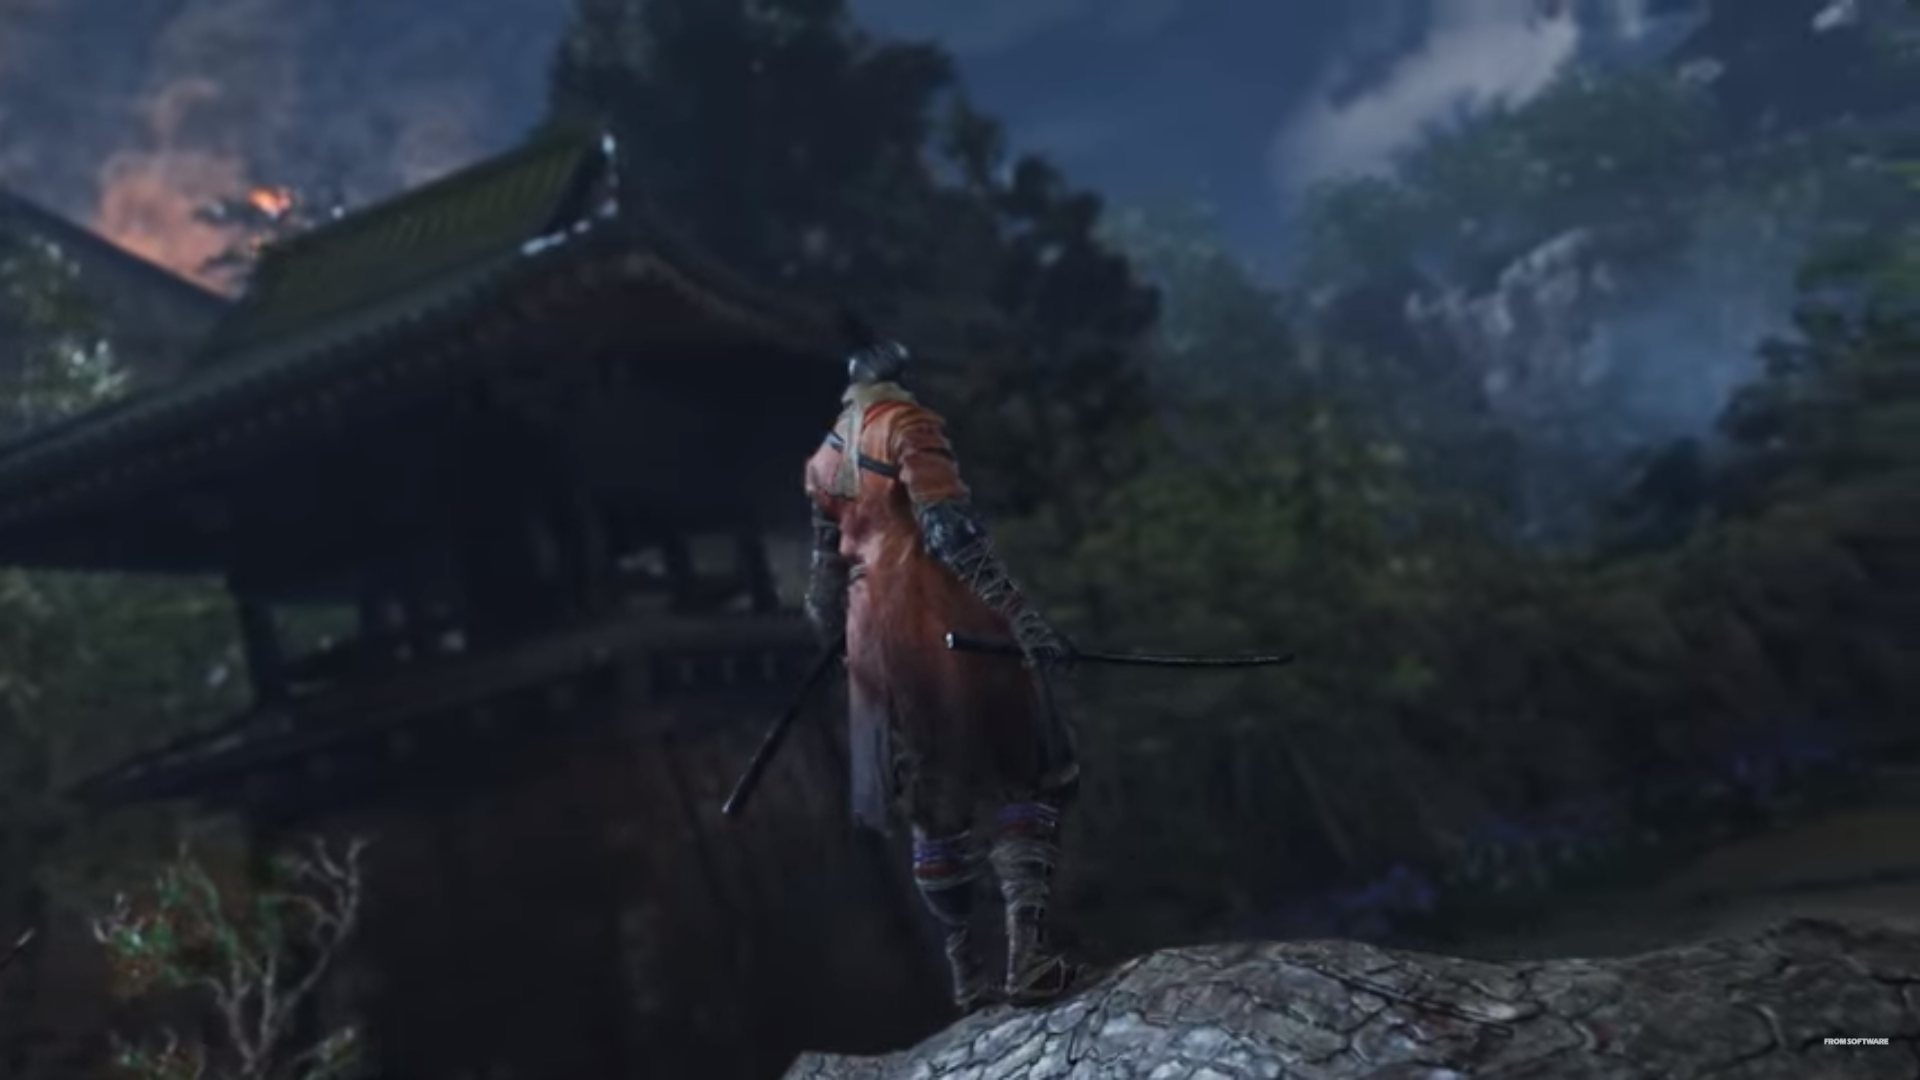 download sekiro shadows die twice for free